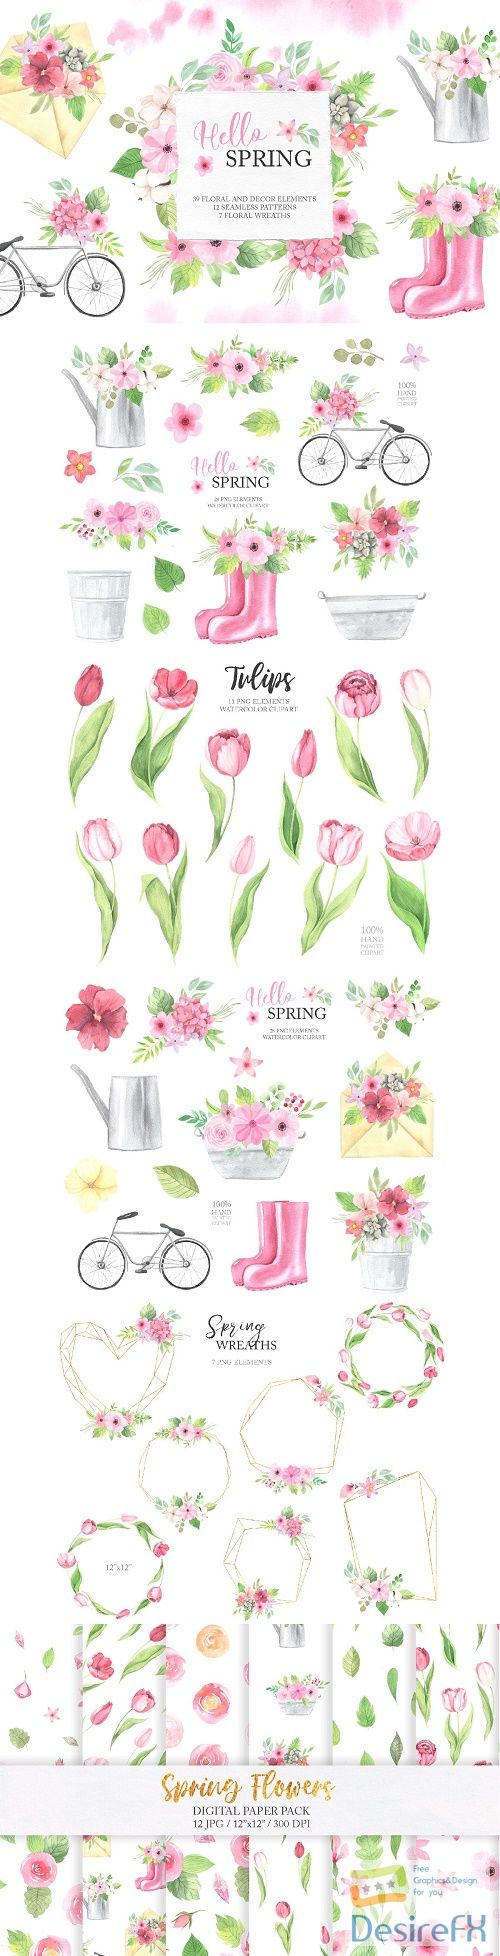 Watercolor Spring Floral Collection - 4699391